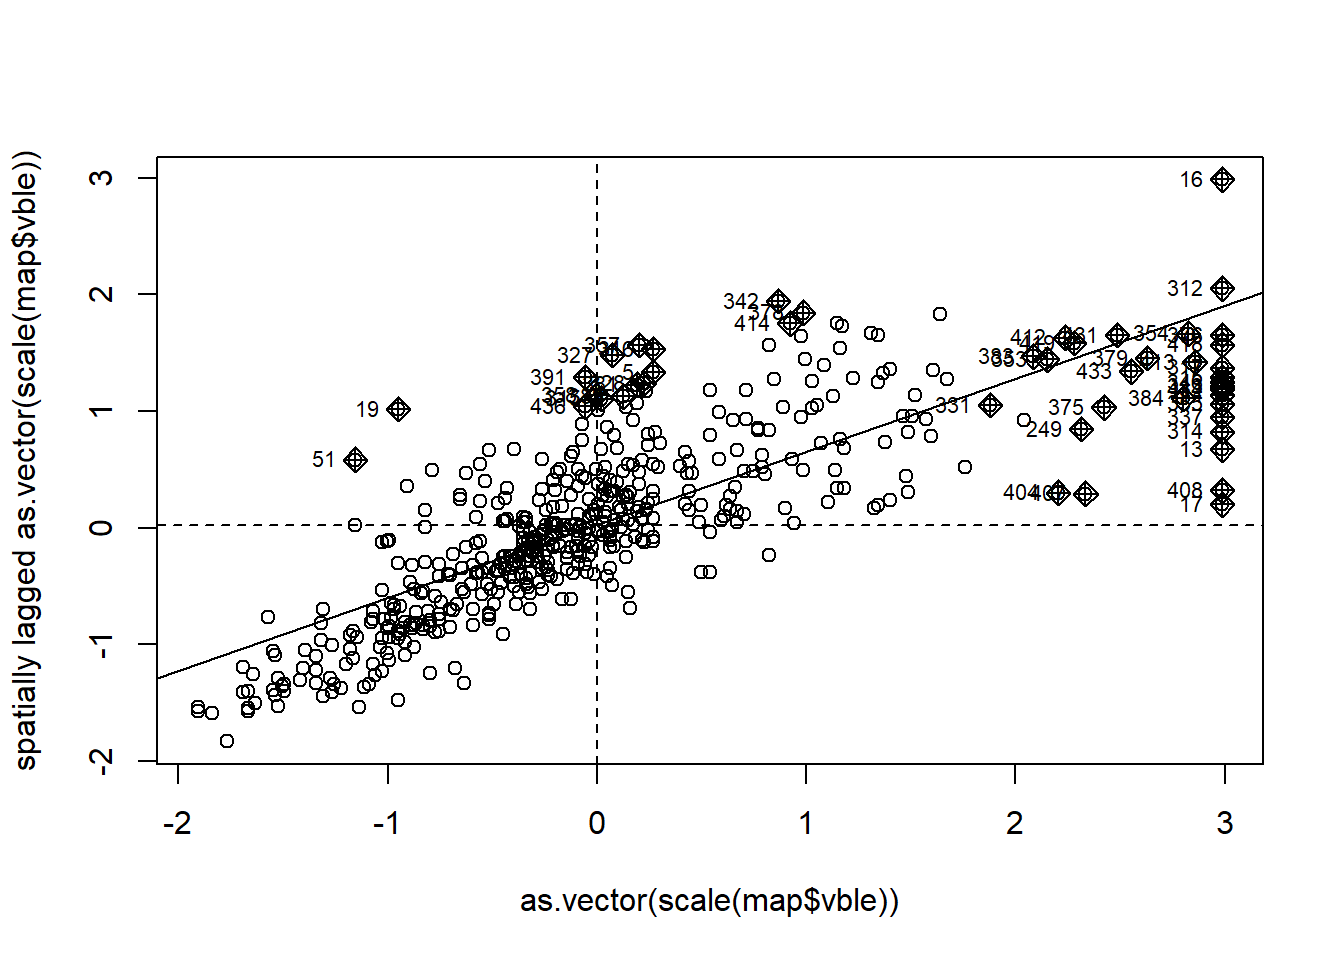 Moran's $I$ scatterplot showing the scaled values against its spatially lagged values.